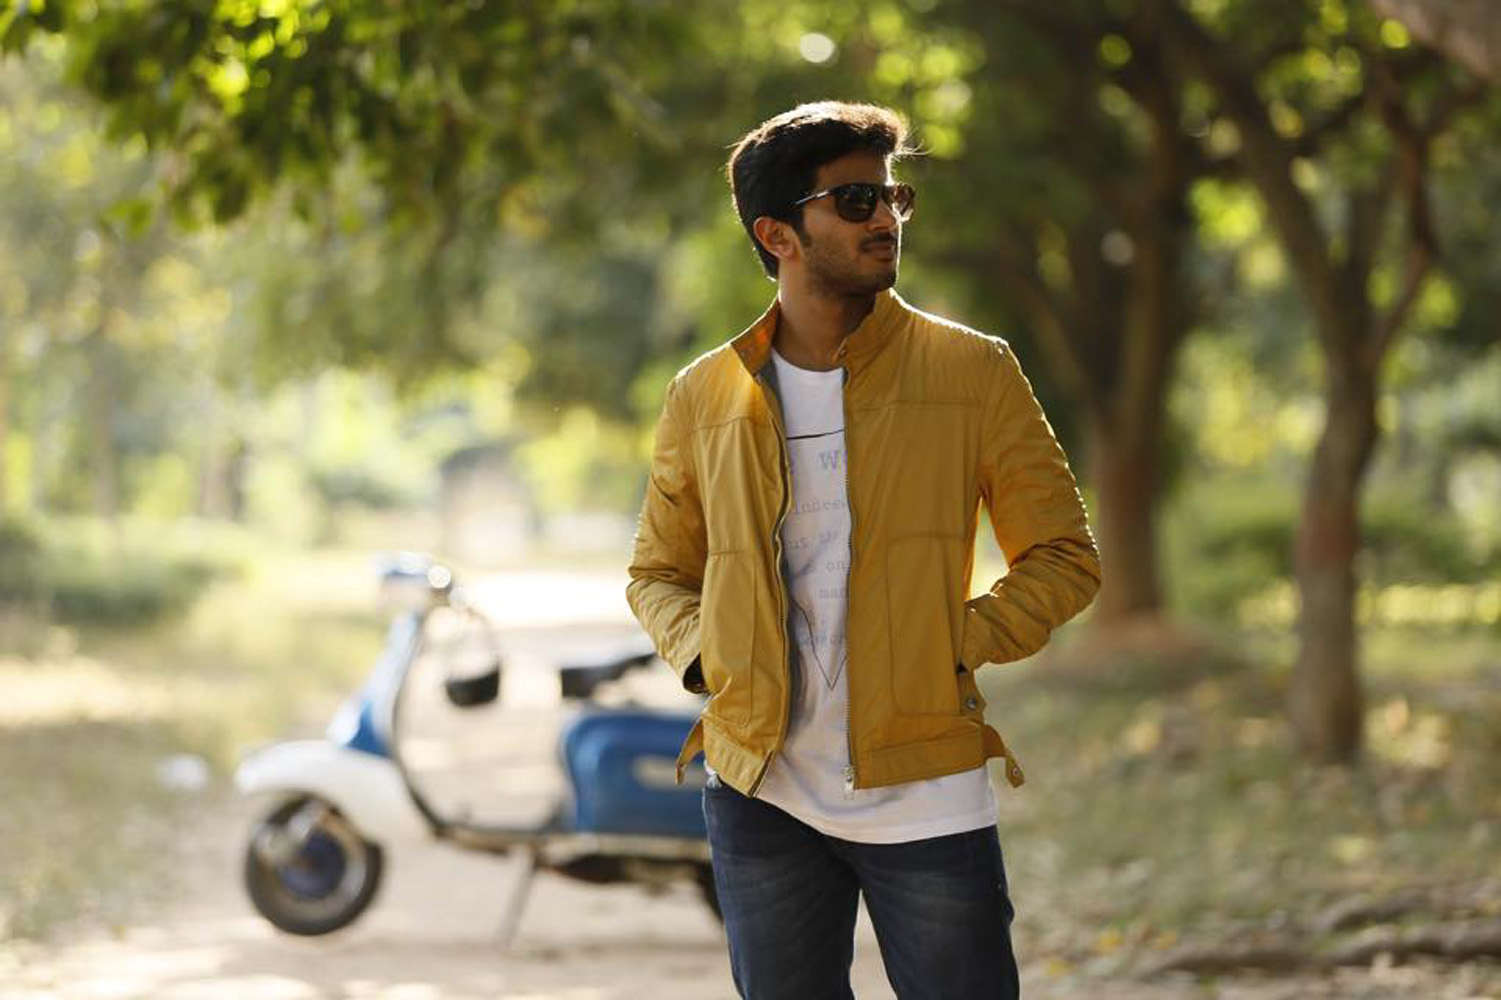 https://onlookersmedia.in/wp-content/uploads/2015/03/100-Days-Of-Love-Stills-Photos-Images-Dulquer-Salmaan-Nithya-Menon-Malayalam-Movies-2015-Onlookers-Media-39.jpg